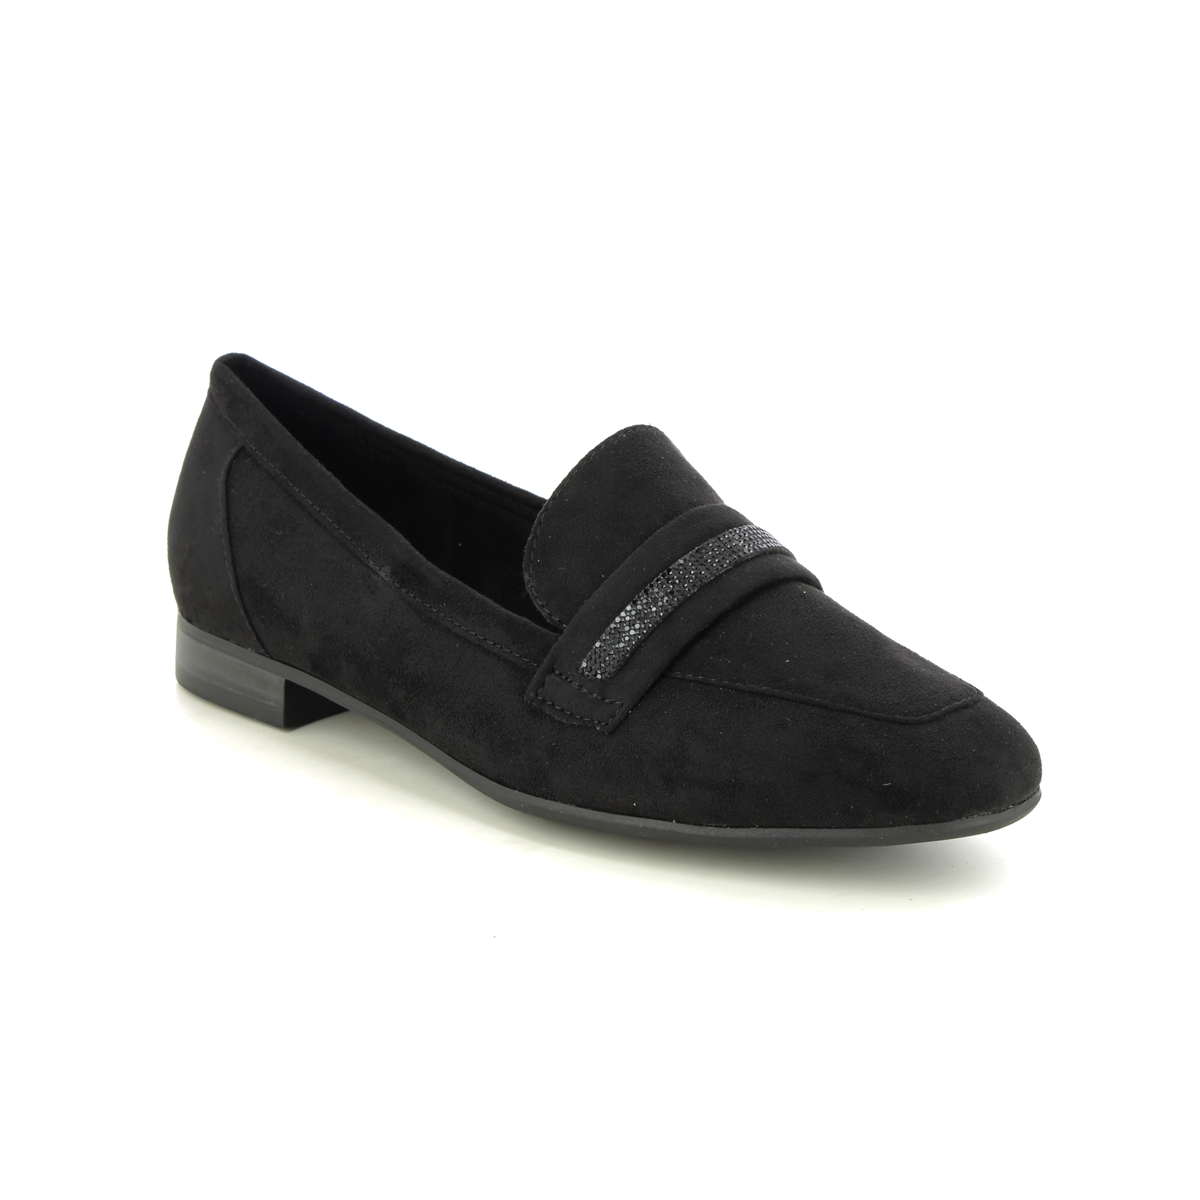 Marco Tozzi Sopi Serina Black Womens loafers 24211-42-001 in a Plain Textile in Size 37